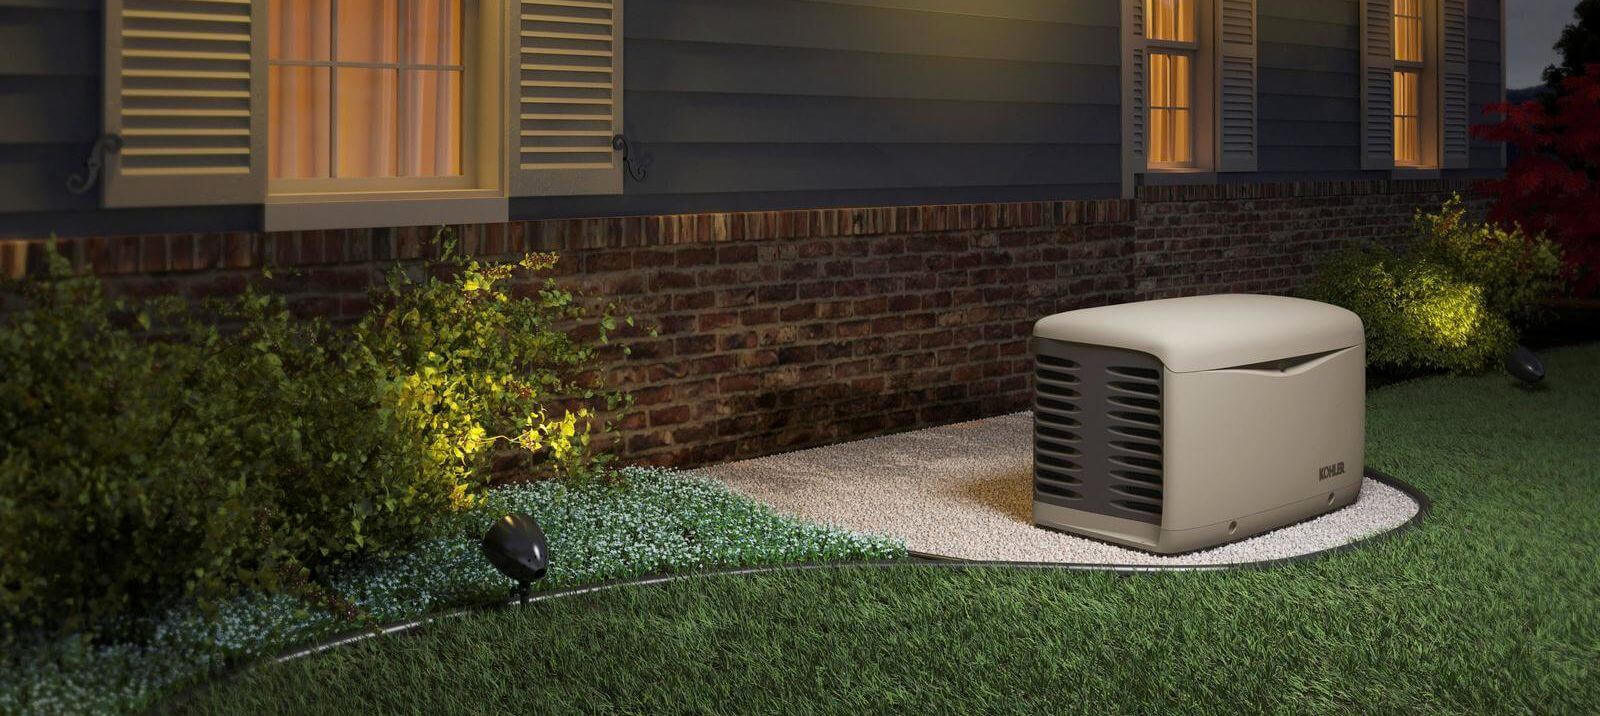 6 Best Kohler Generators – Reviews of the Top Models from the Brand (Fall 2022)